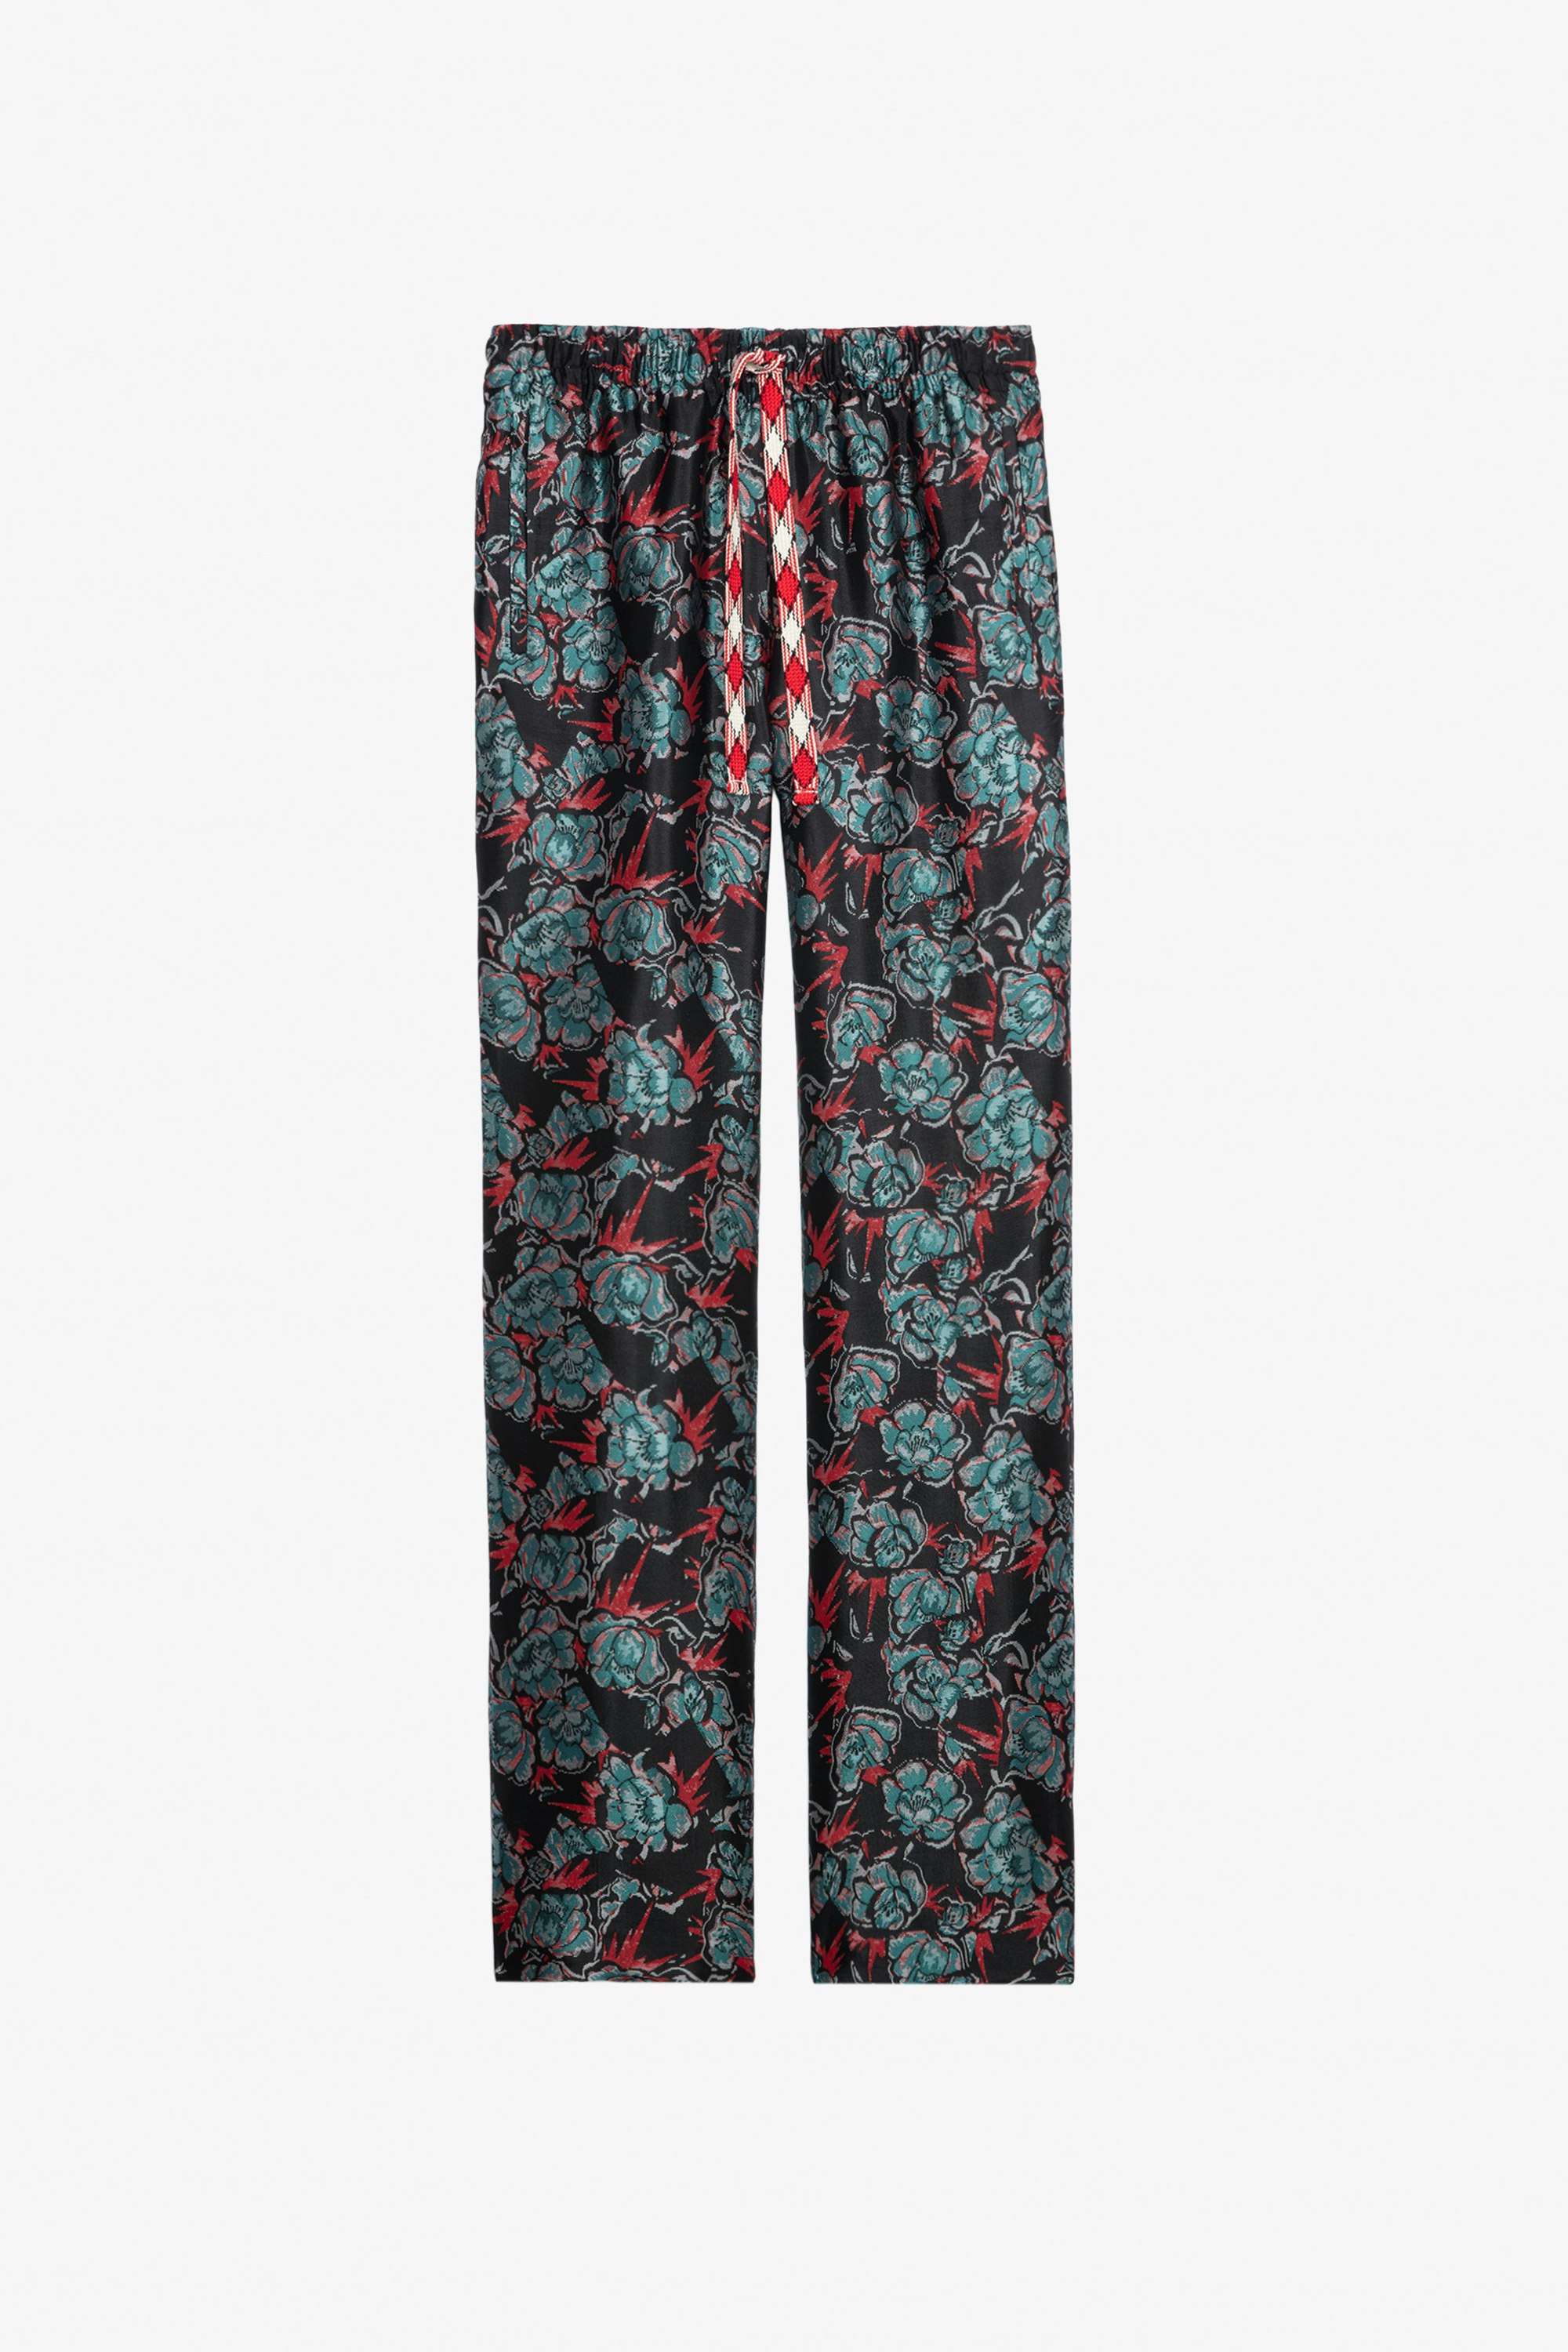 Pomy Thunder Jacquard Trousers - Women’s black floral jacquard trousers with patterned drawstring.